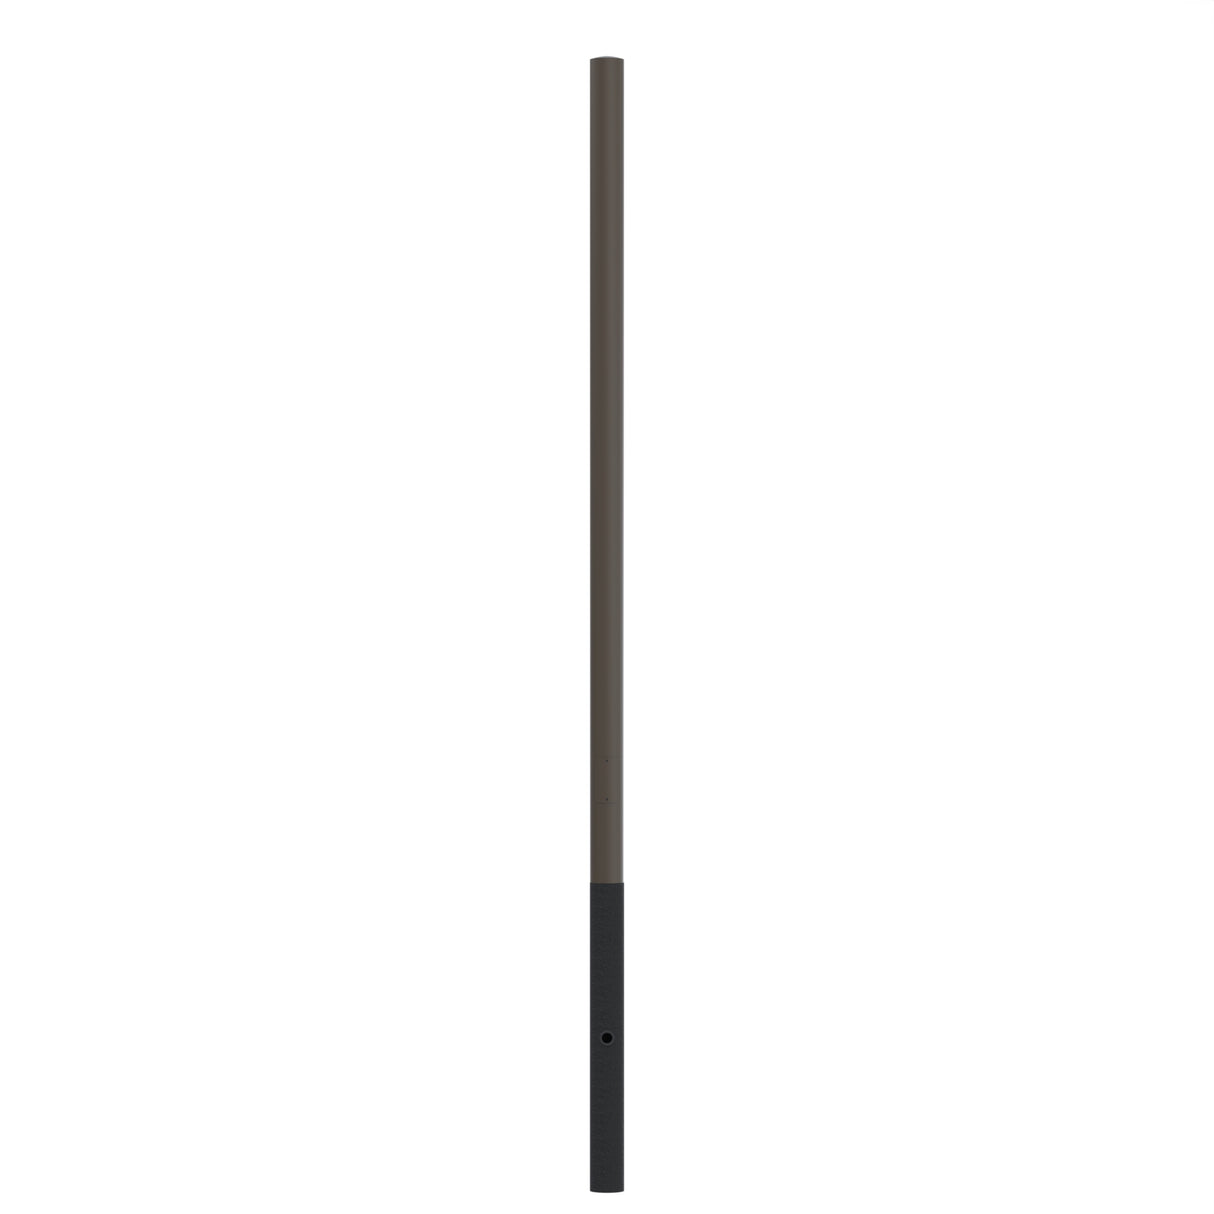 20' Above Grade x 5.0" OD  x 0.188" Thick, Round Straight Aluminum, Direct Burial Light Pole